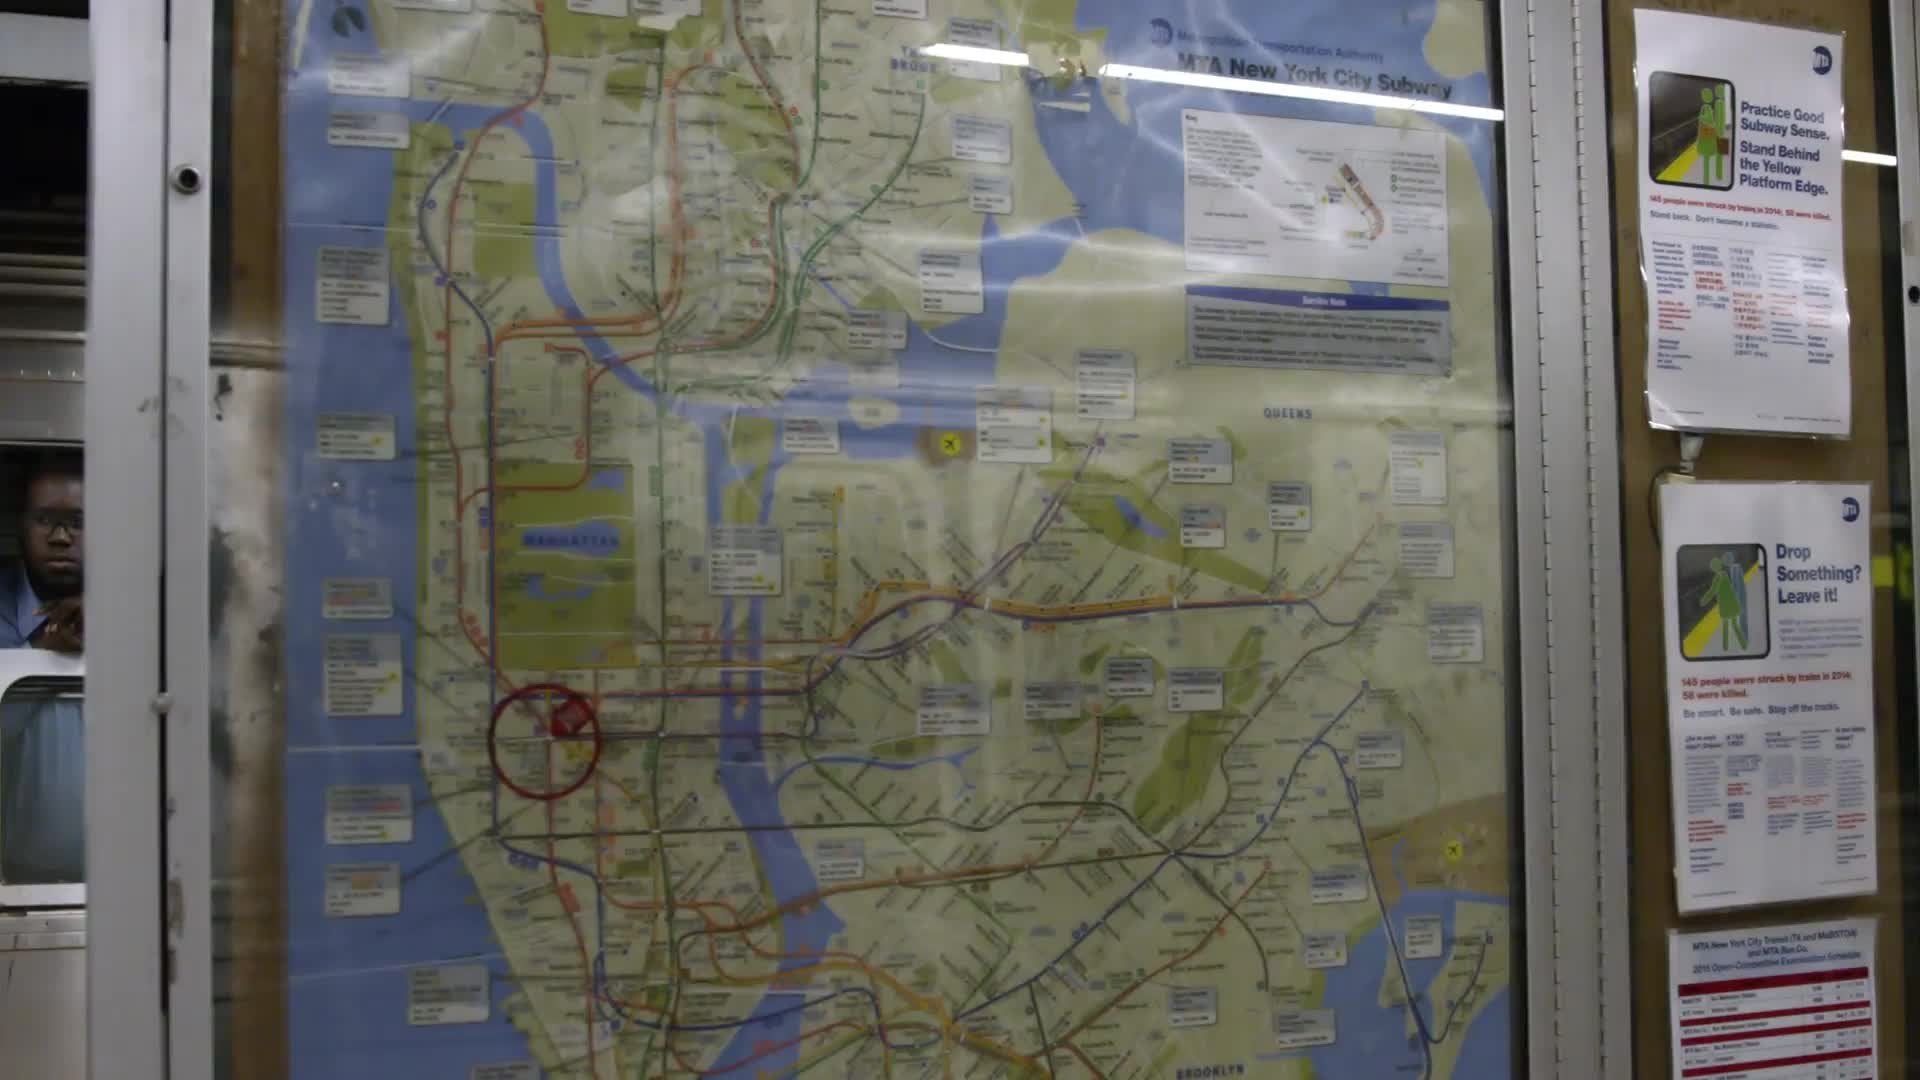 Times Square subway station sign tilting up from MTA city map - reflection of train moving